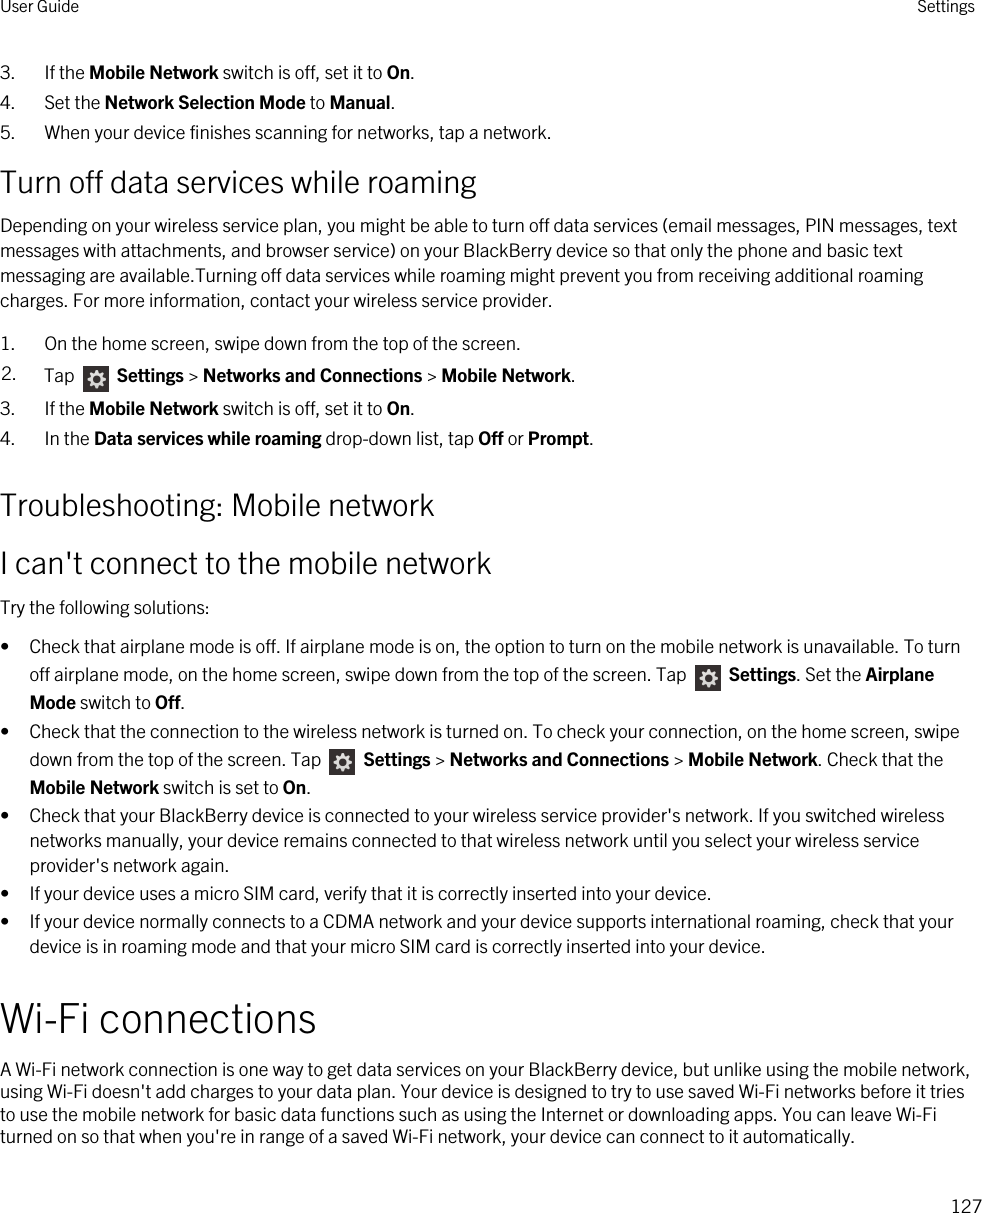 3. If the Mobile Network switch is off, set it to On.4. Set the Network Selection Mode to Manual.5. When your device finishes scanning for networks, tap a network.Turn off data services while roamingDepending on your wireless service plan, you might be able to turn off data services (email messages, PIN messages, text messages with attachments, and browser service) on your BlackBerry device so that only the phone and basic text messaging are available.Turning off data services while roaming might prevent you from receiving additional roaming charges. For more information, contact your wireless service provider.1. On the home screen, swipe down from the top of the screen.2. Tap   Settings &gt; Networks and Connections &gt; Mobile Network.3. If the Mobile Network switch is off, set it to On.4. In the Data services while roaming drop-down list, tap Off or Prompt.Troubleshooting: Mobile networkI can&apos;t connect to the mobile networkTry the following solutions:• Check that airplane mode is off. If airplane mode is on, the option to turn on the mobile network is unavailable. To turn off airplane mode, on the home screen, swipe down from the top of the screen. Tap   Settings. Set the Airplane Mode switch to Off.• Check that the connection to the wireless network is turned on. To check your connection, on the home screen, swipe down from the top of the screen. Tap   Settings &gt; Networks and Connections &gt; Mobile Network. Check that the Mobile Network switch is set to On.• Check that your BlackBerry device is connected to your wireless service provider&apos;s network. If you switched wireless networks manually, your device remains connected to that wireless network until you select your wireless service provider&apos;s network again.• If your device uses a micro SIM card, verify that it is correctly inserted into your device.• If your device normally connects to a CDMA network and your device supports international roaming, check that your device is in roaming mode and that your micro SIM card is correctly inserted into your device.Wi-Fi connectionsA Wi-Fi network connection is one way to get data services on your BlackBerry device, but unlike using the mobile network, using Wi-Fi doesn&apos;t add charges to your data plan. Your device is designed to try to use saved Wi-Fi networks before it tries to use the mobile network for basic data functions such as using the Internet or downloading apps. You can leave Wi-Fi turned on so that when you&apos;re in range of a saved Wi-Fi network, your device can connect to it automatically.User Guide Settings127